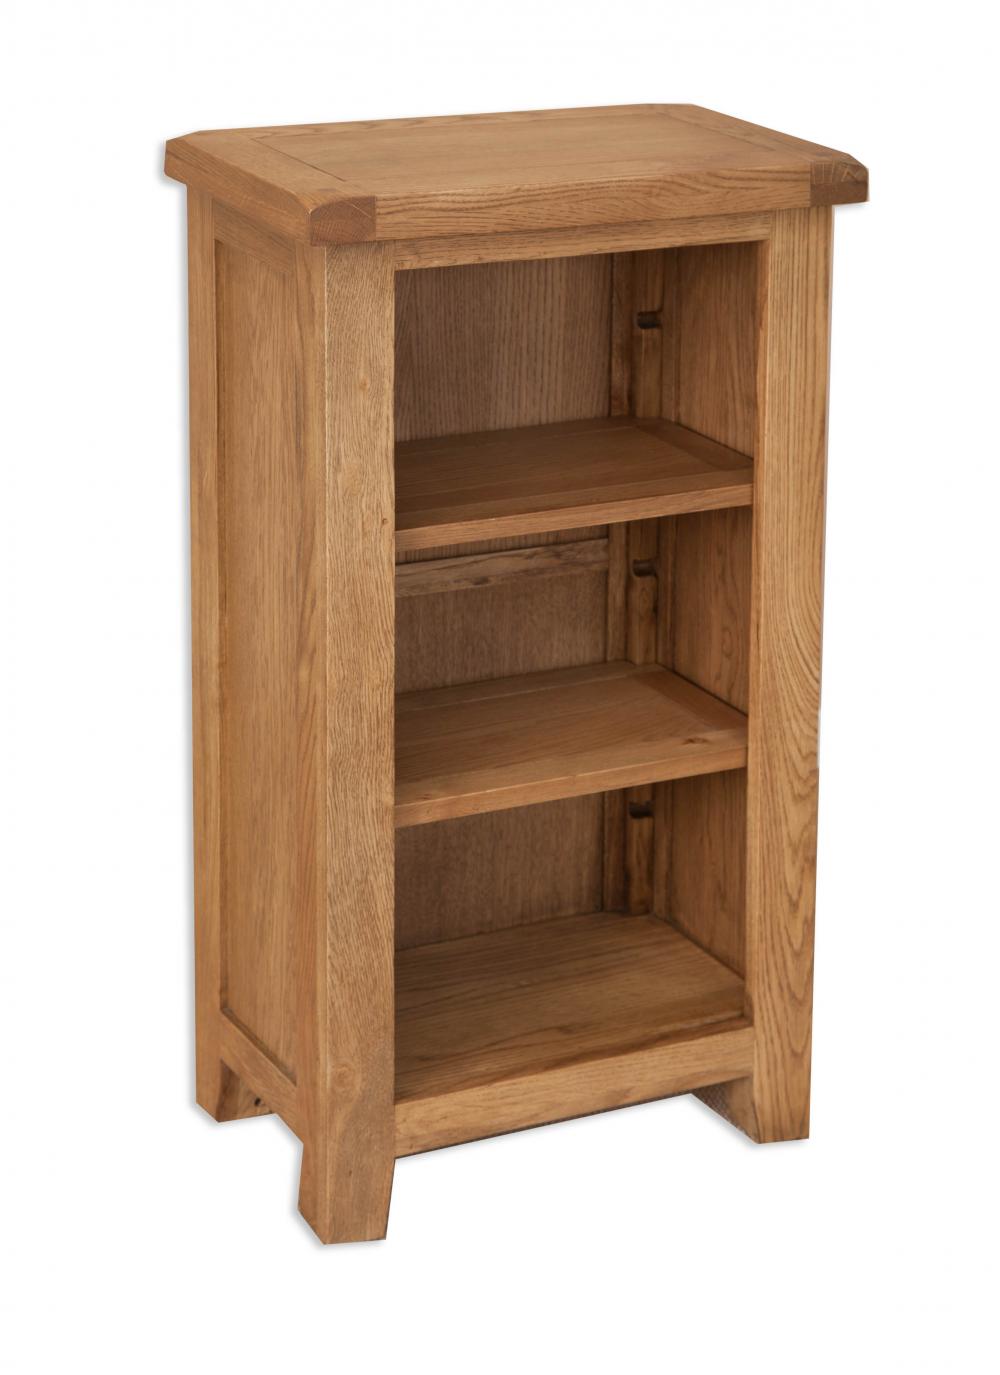 Country Oak Small Bookcase/DVD Rack £229